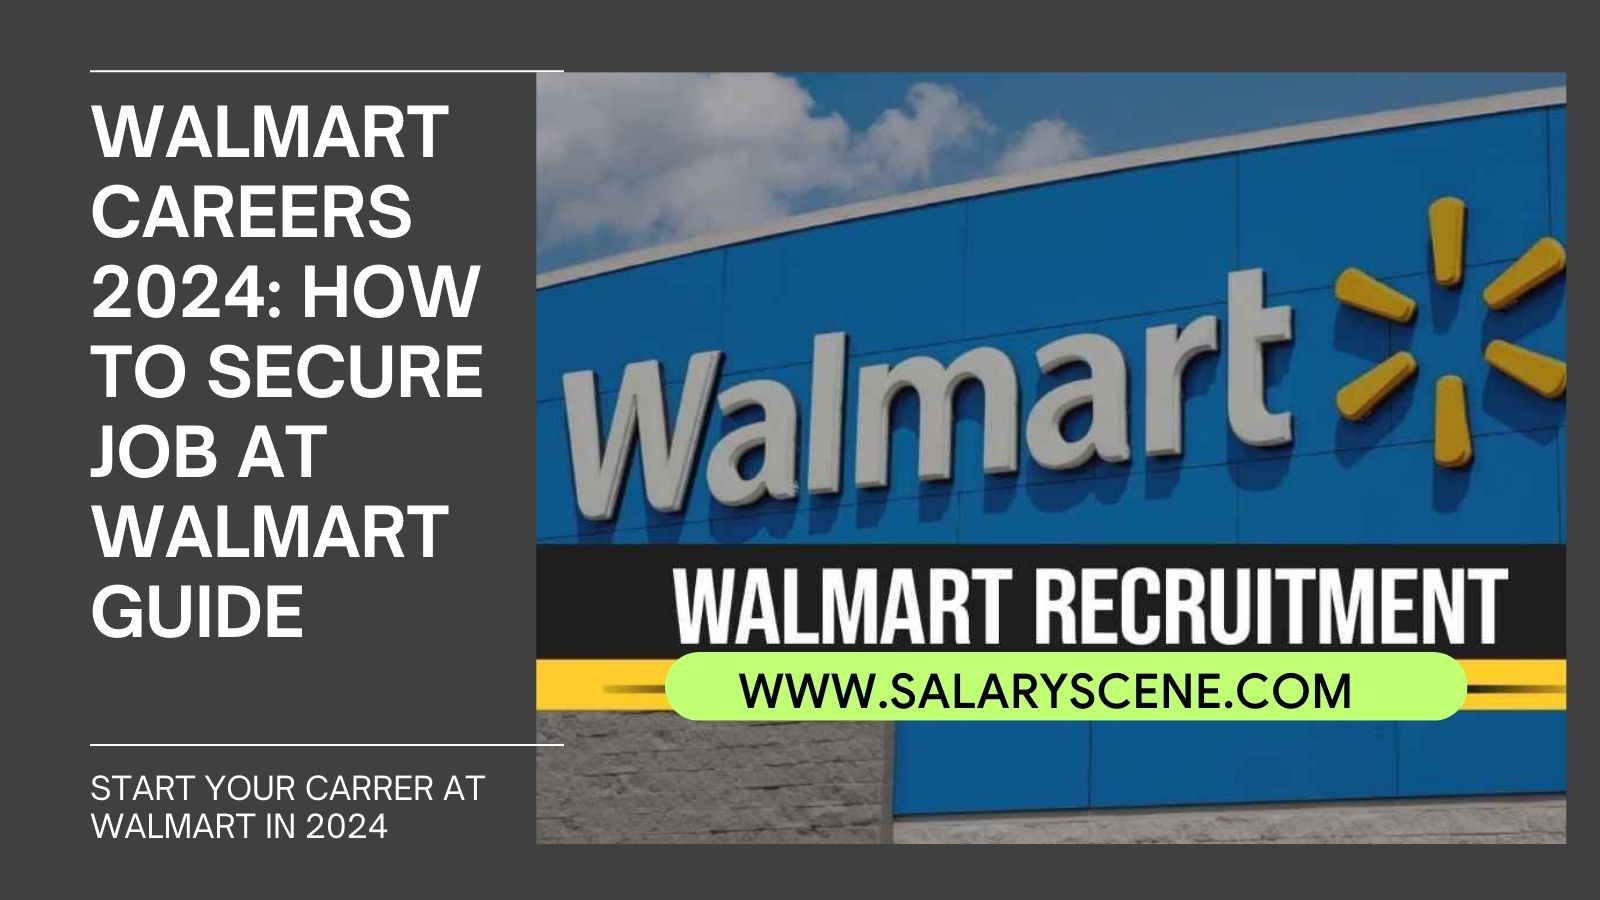 Walmart Careers 2024 How To Secure A Job At Walmart Guide